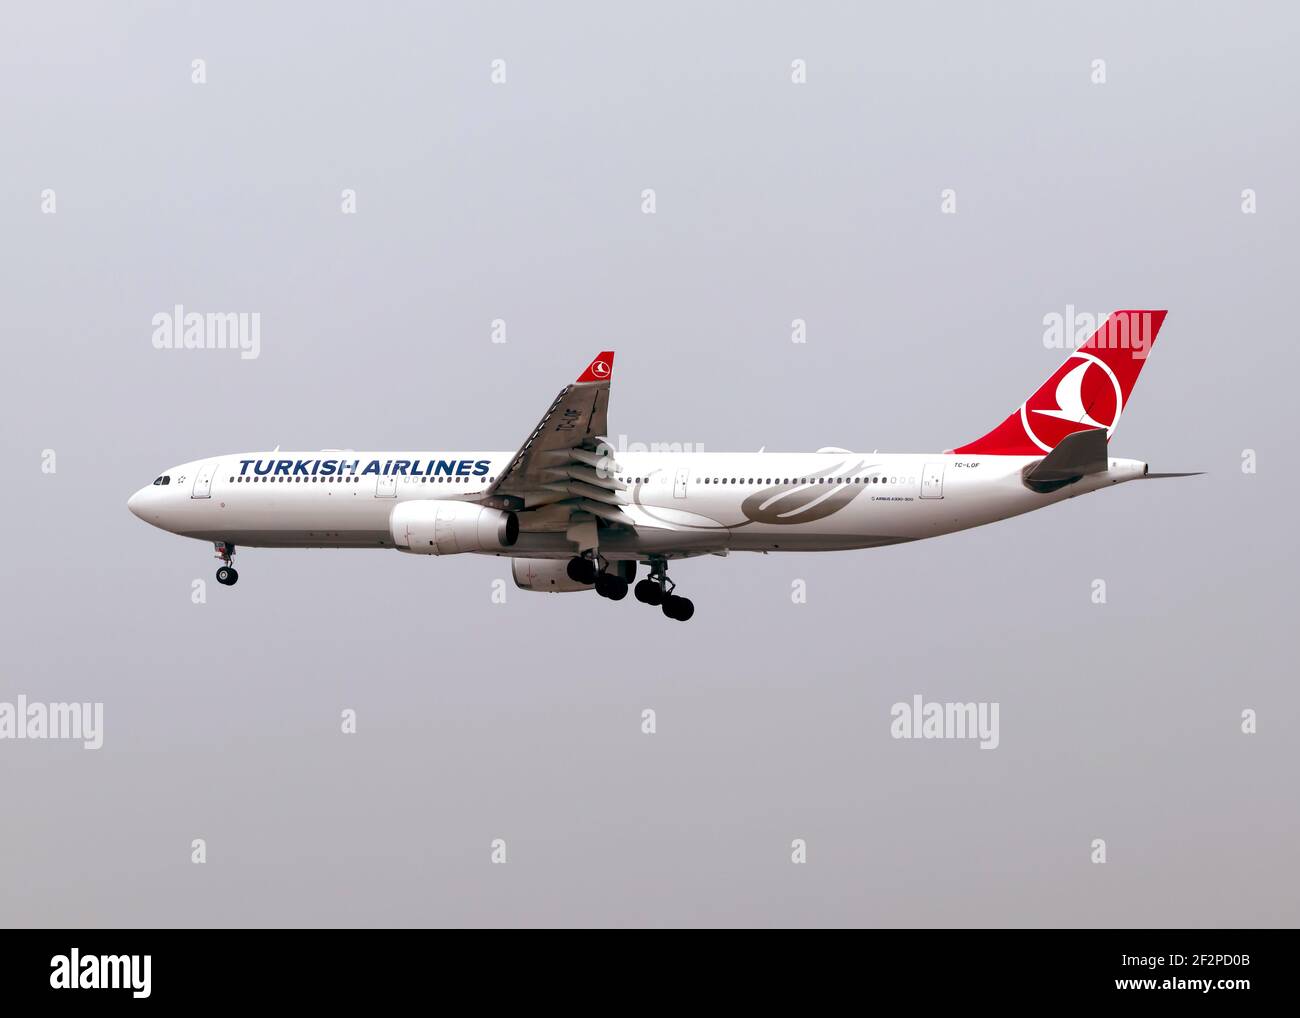 London, Heathrow Airport - April 2019: Turkish Airlines, Airbus A330 flying over London through an overcast sky with no clouds. Image Abdul Quraishi Stock Photo